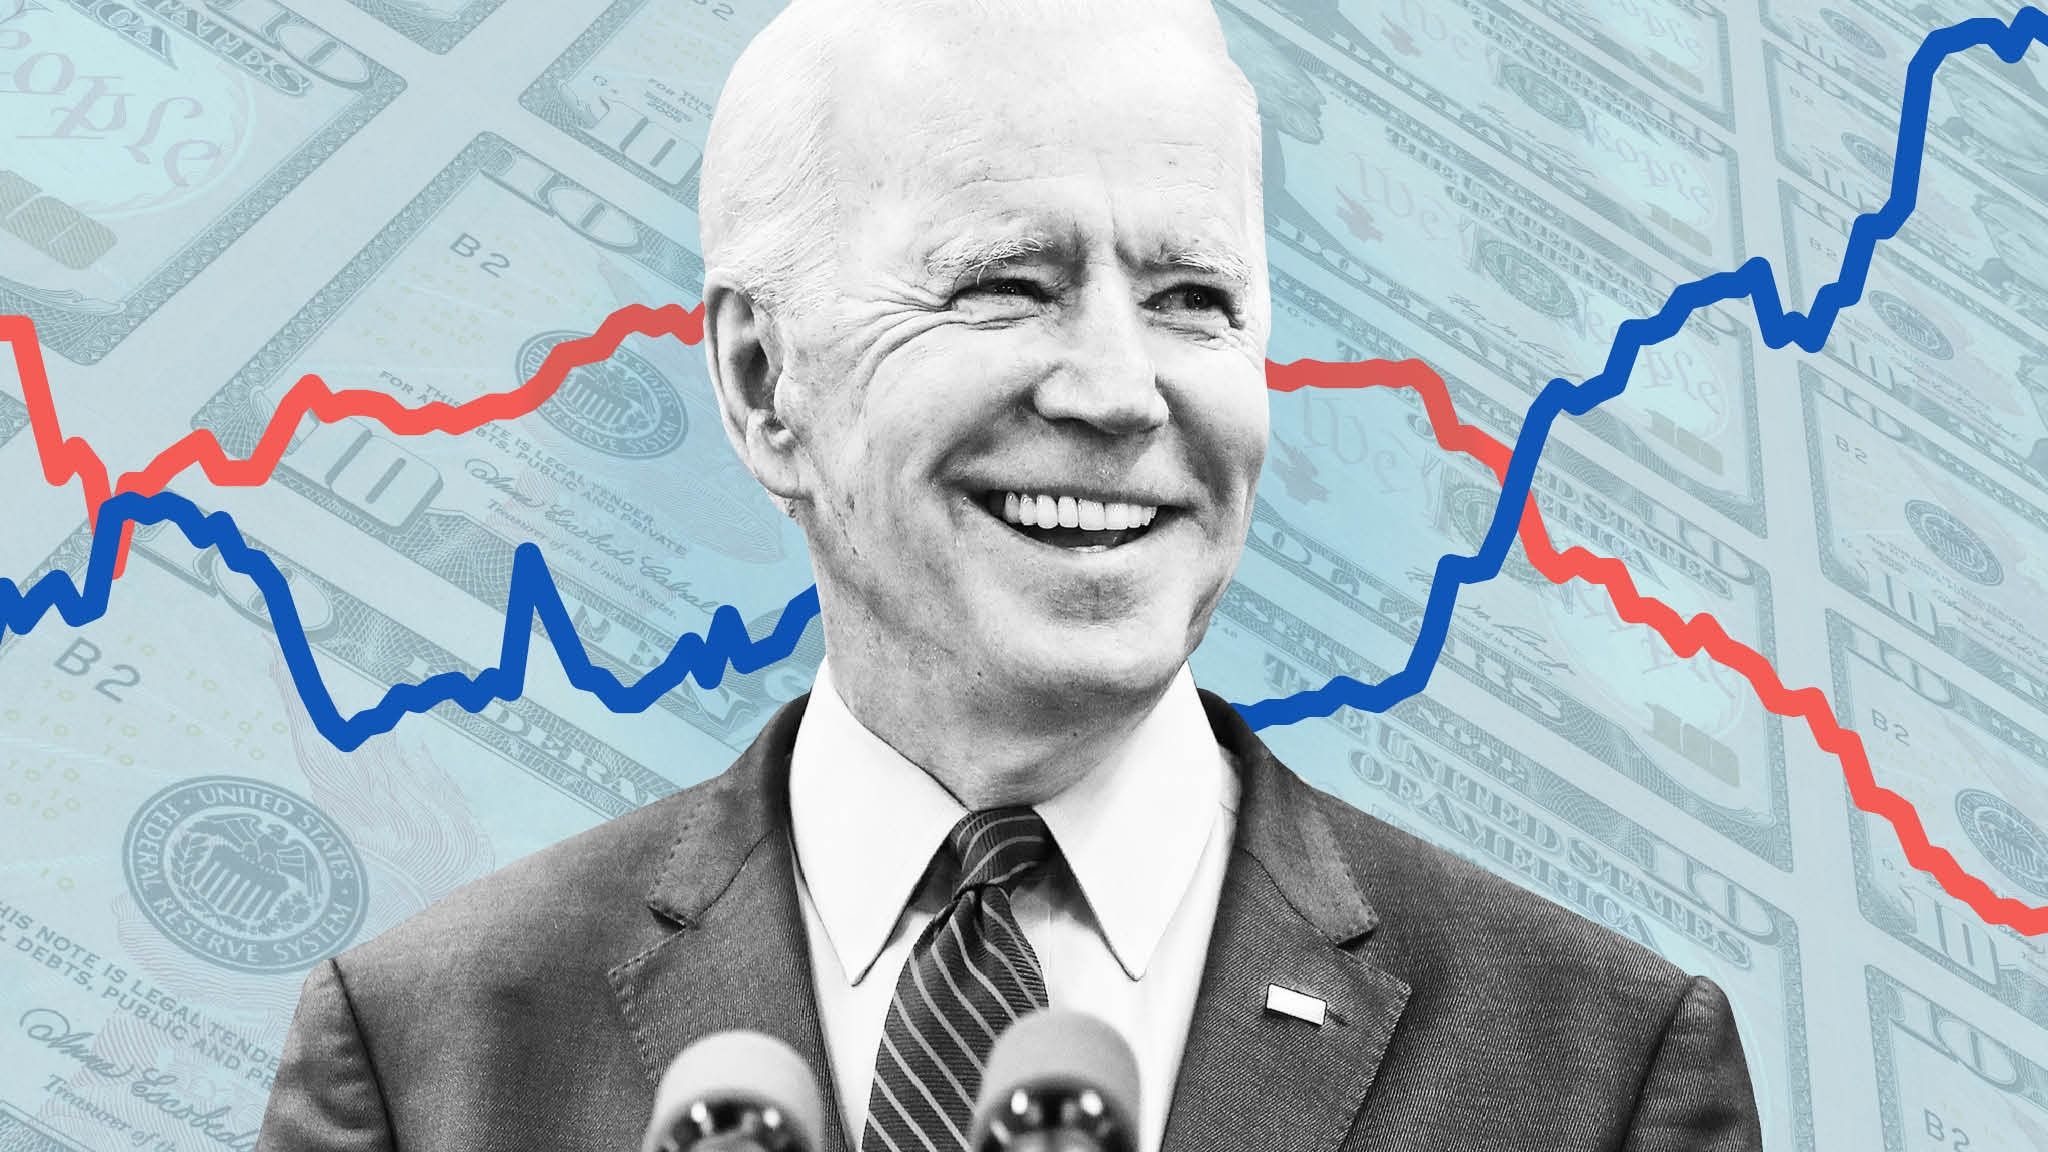 Wall Street starts to picture Joe Biden in the White House